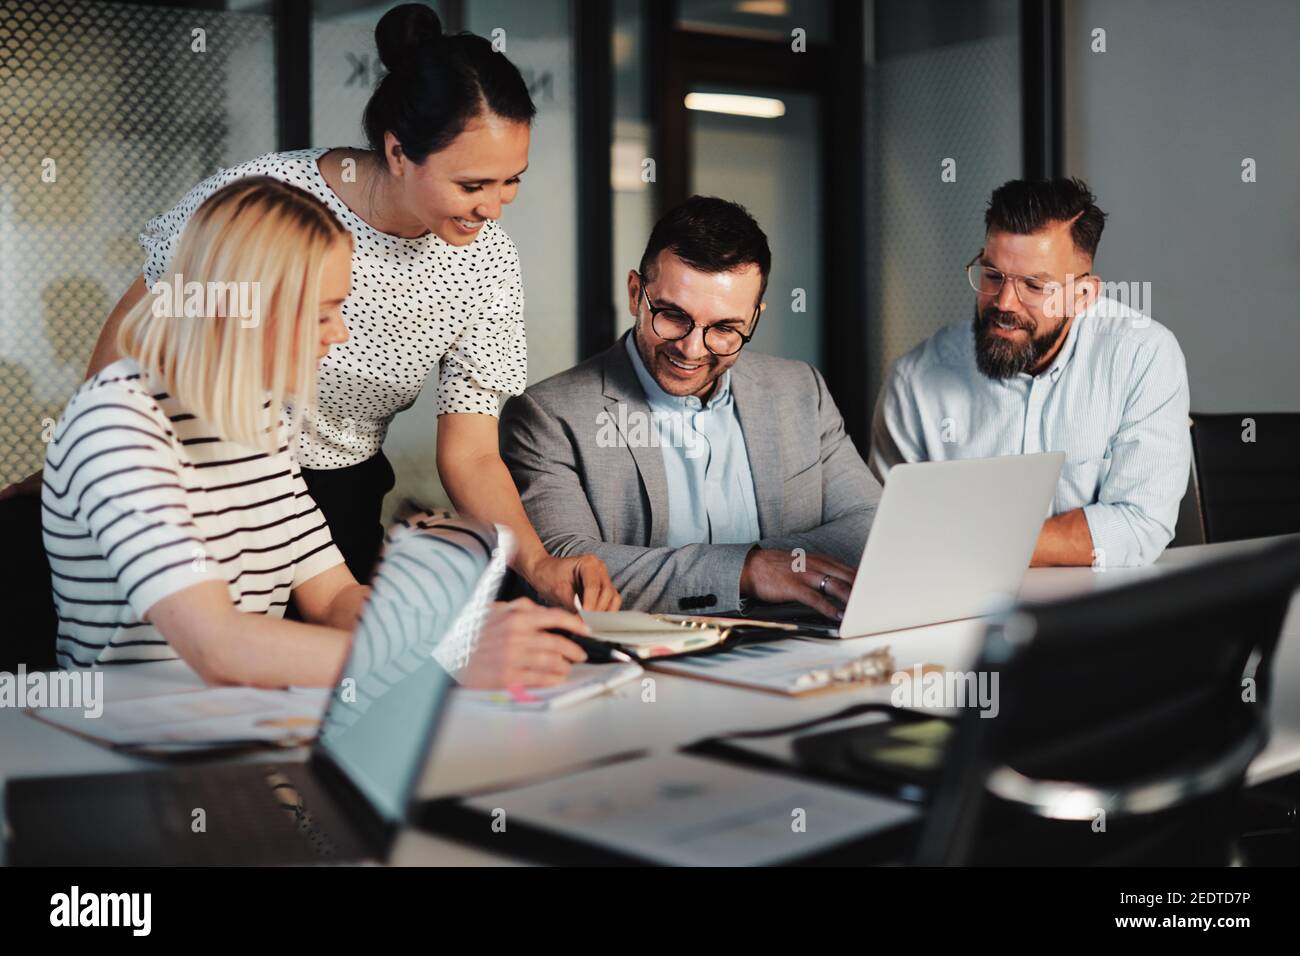 Smiling group of businesspeople talking together at a table during a meeting in an office boardroom Stock Photo